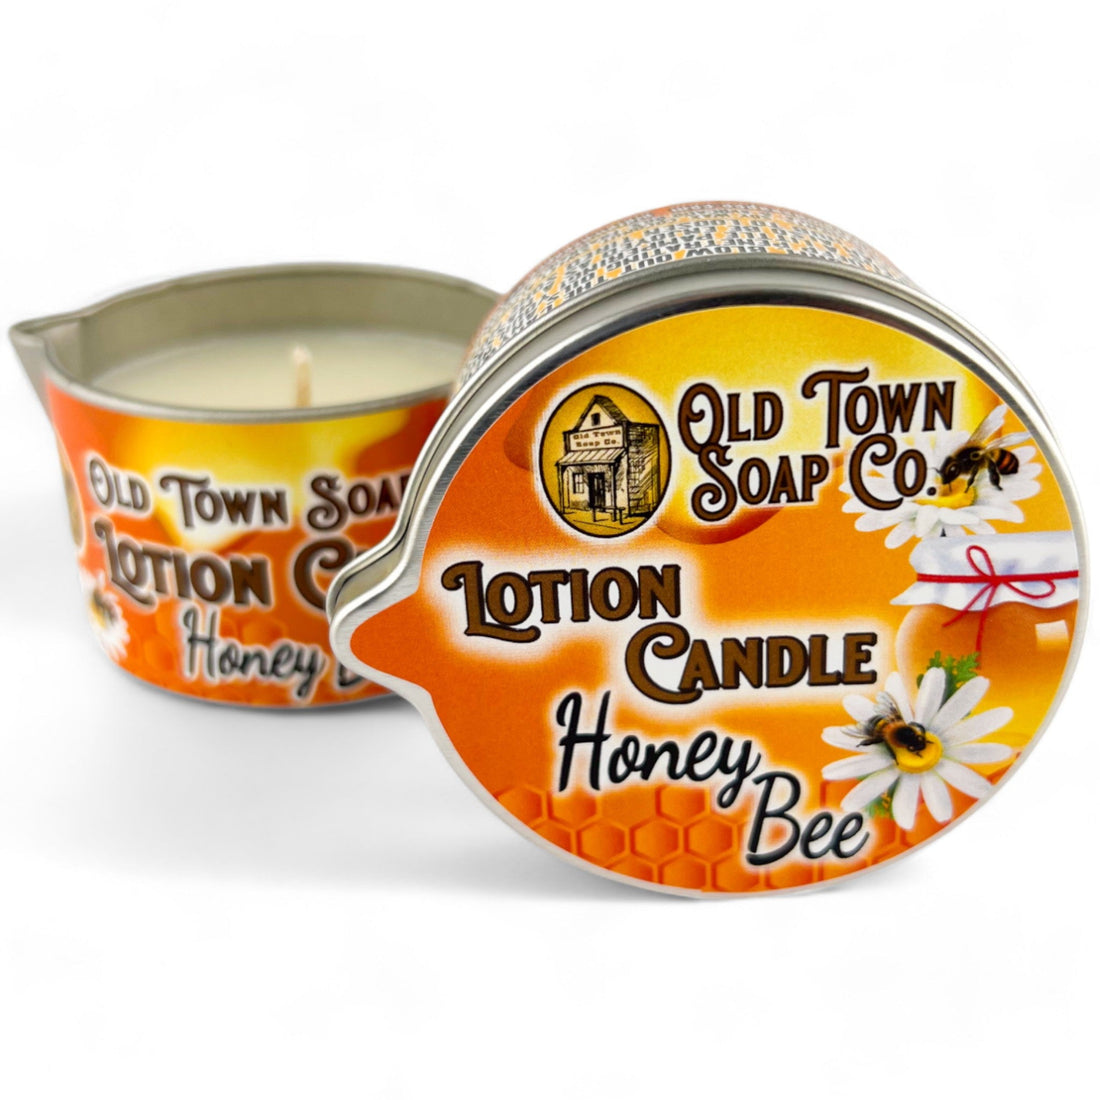 Honey Bee -Lotion Candle - Old Town Soap Co.